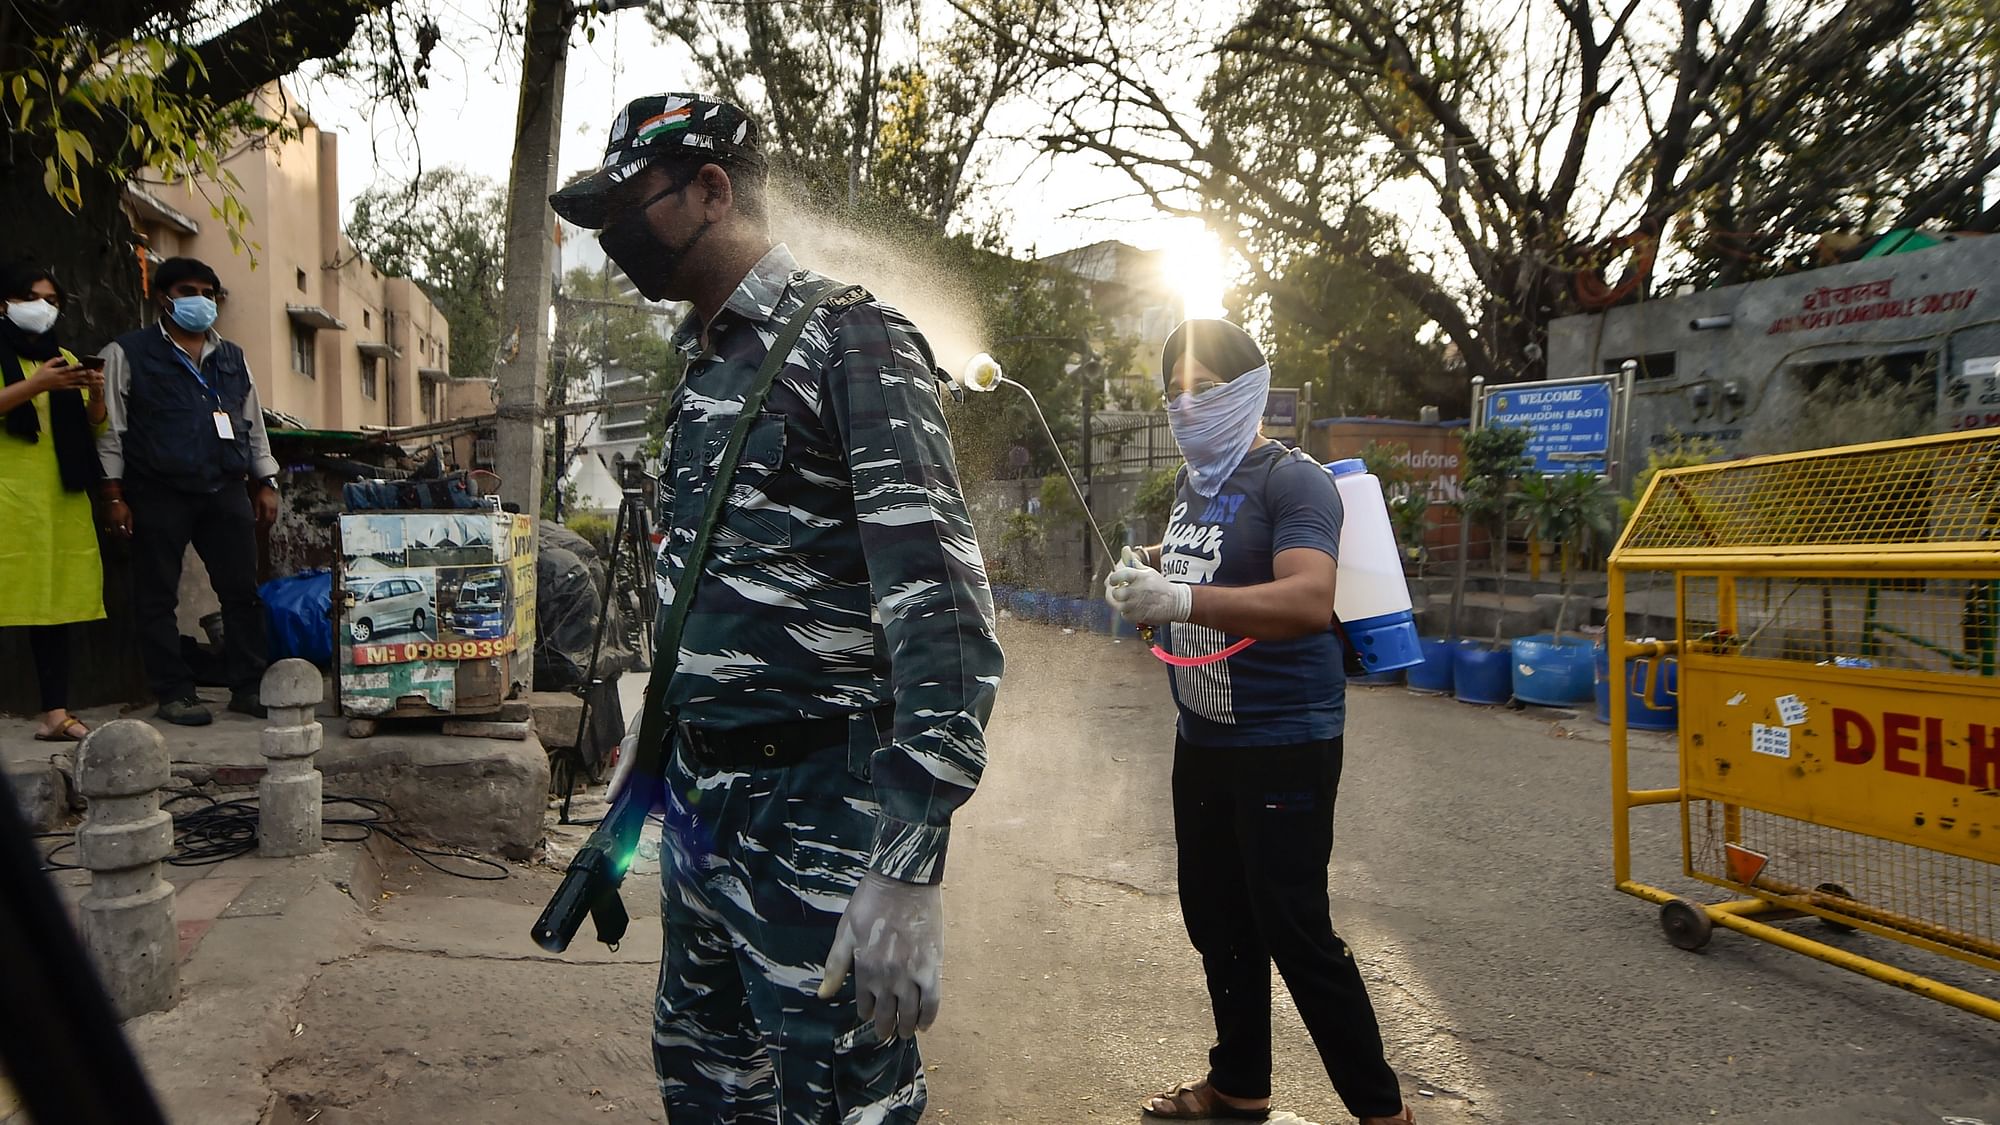  A volunteer sprays disinfectant on paramilitary personnel as they cordon off an area in Nizamuddin, Delhi. Image used for representation only.